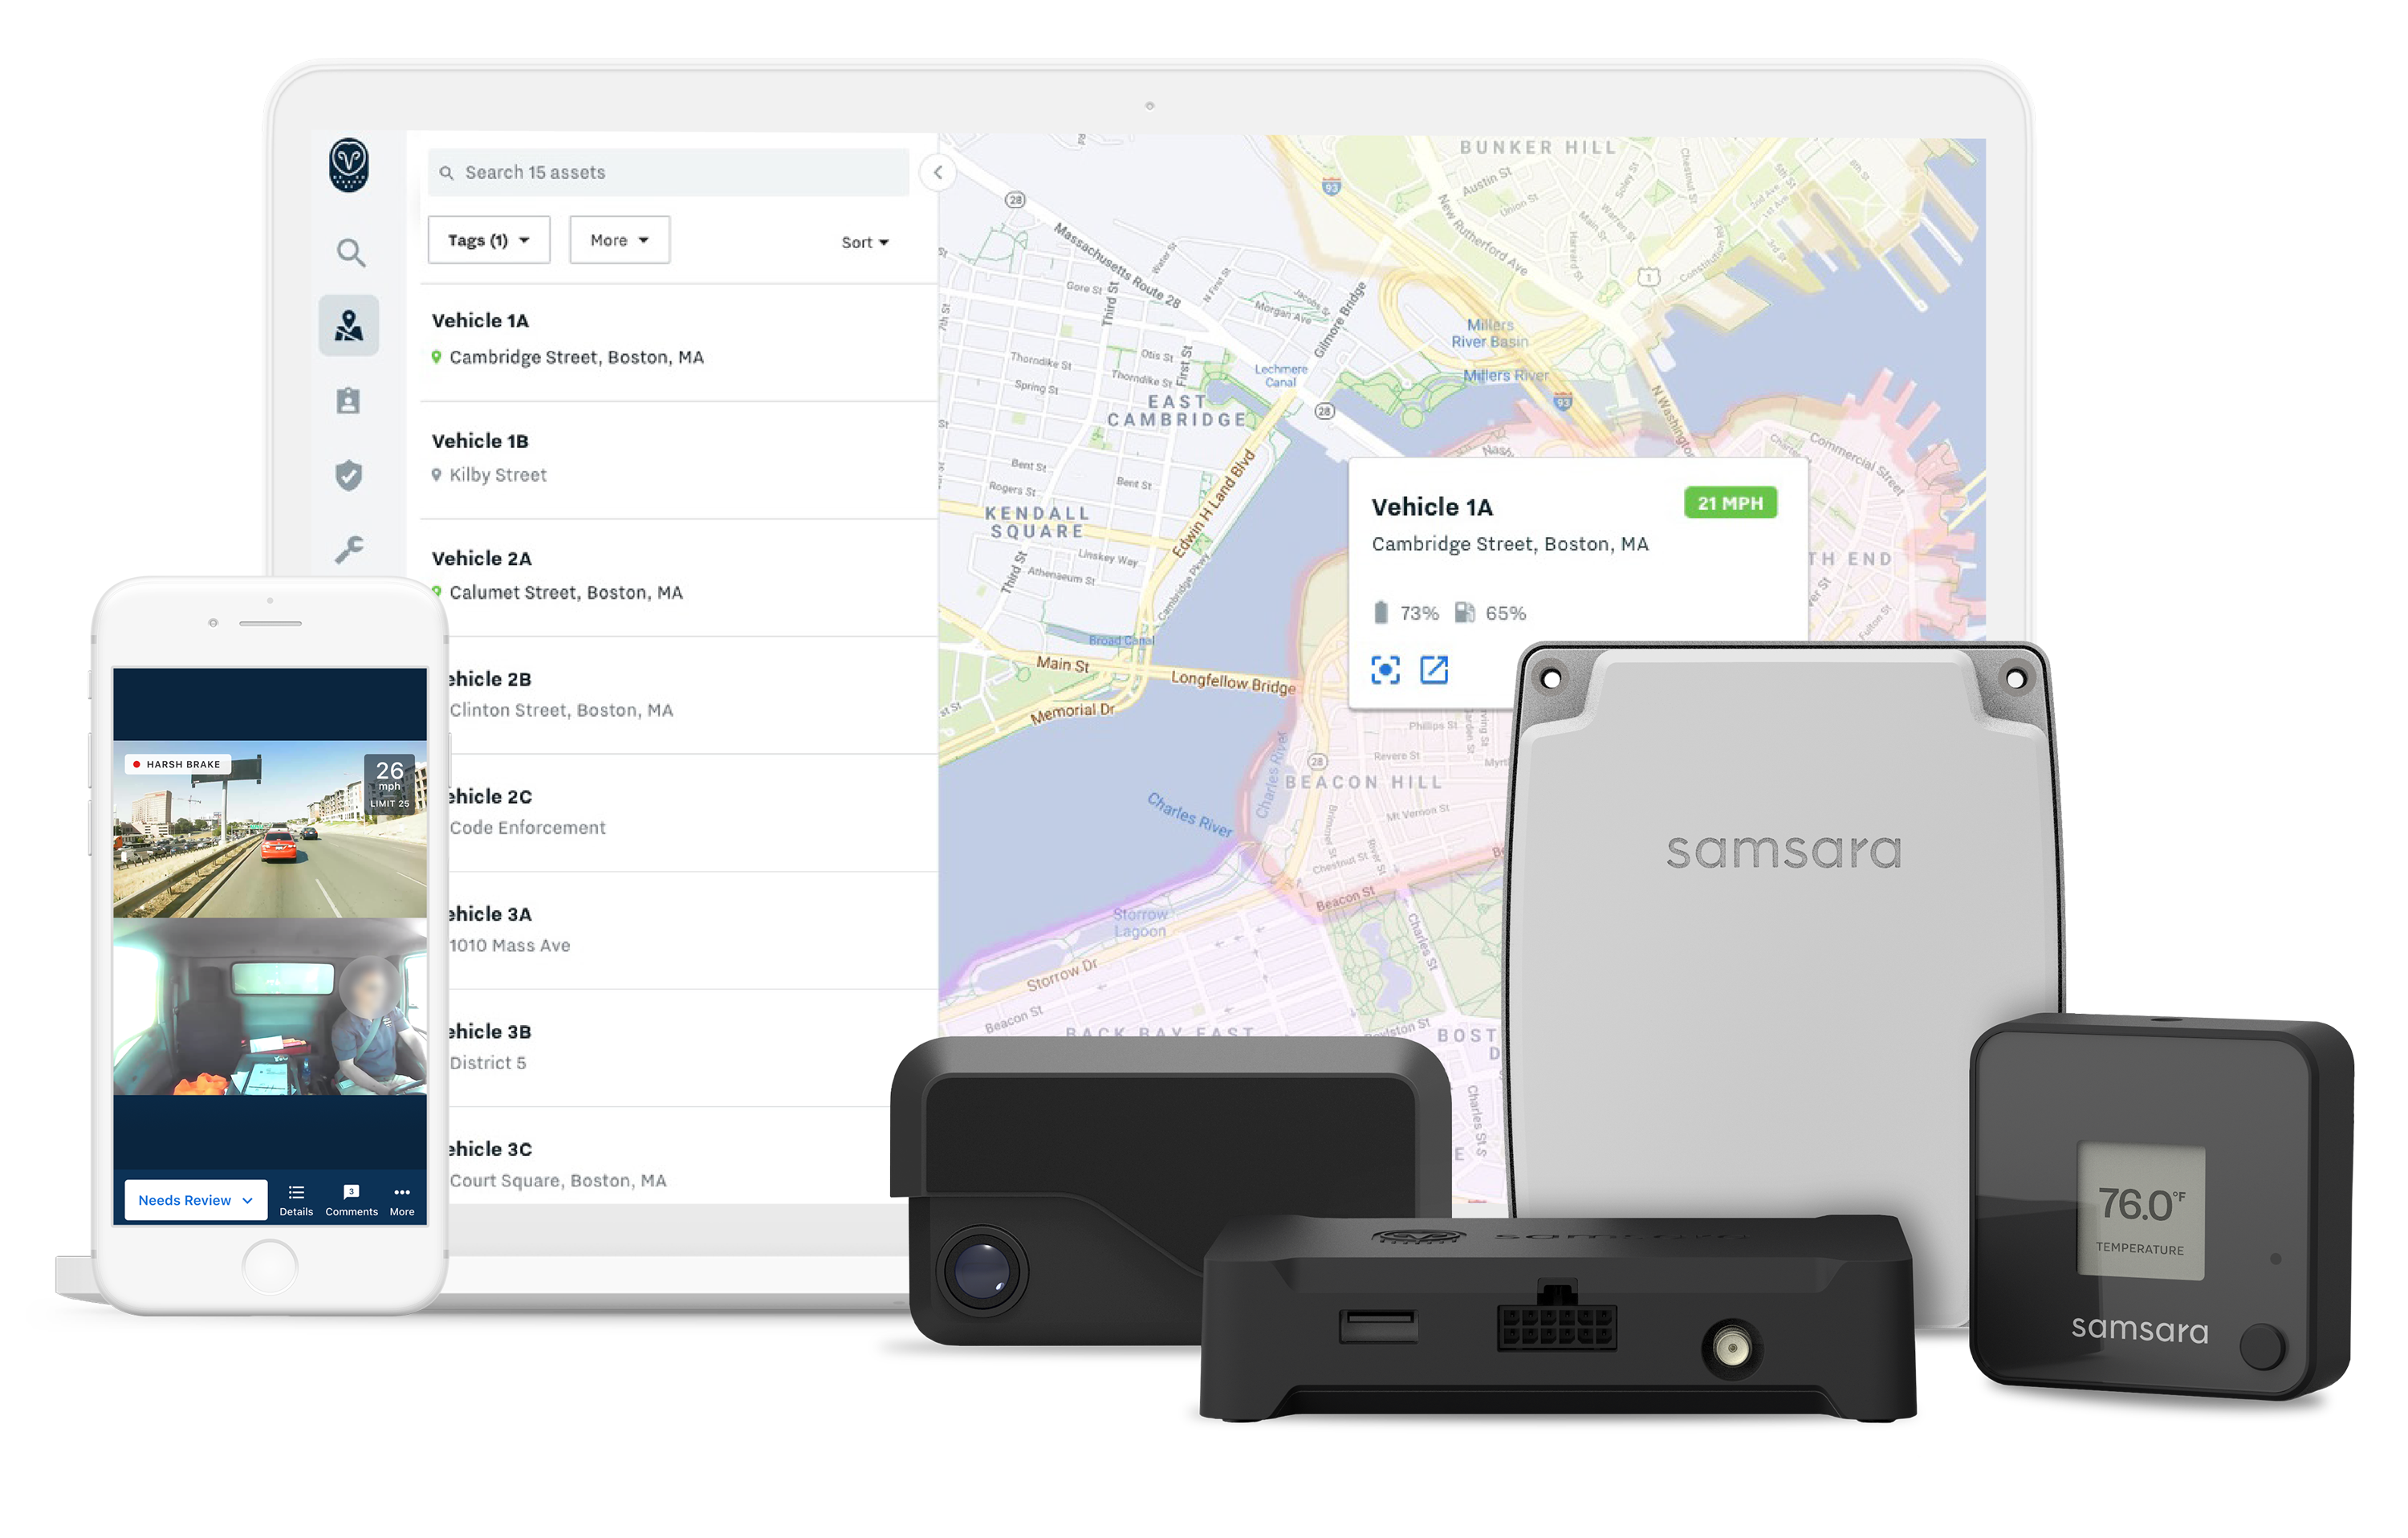 One platform to connect your people, systems, and data.
When your cameras, sensors, and workflows are connected, your whole organization operates as one. That means faster, more informed decisions for a secure, scalable, and flexible organization.
